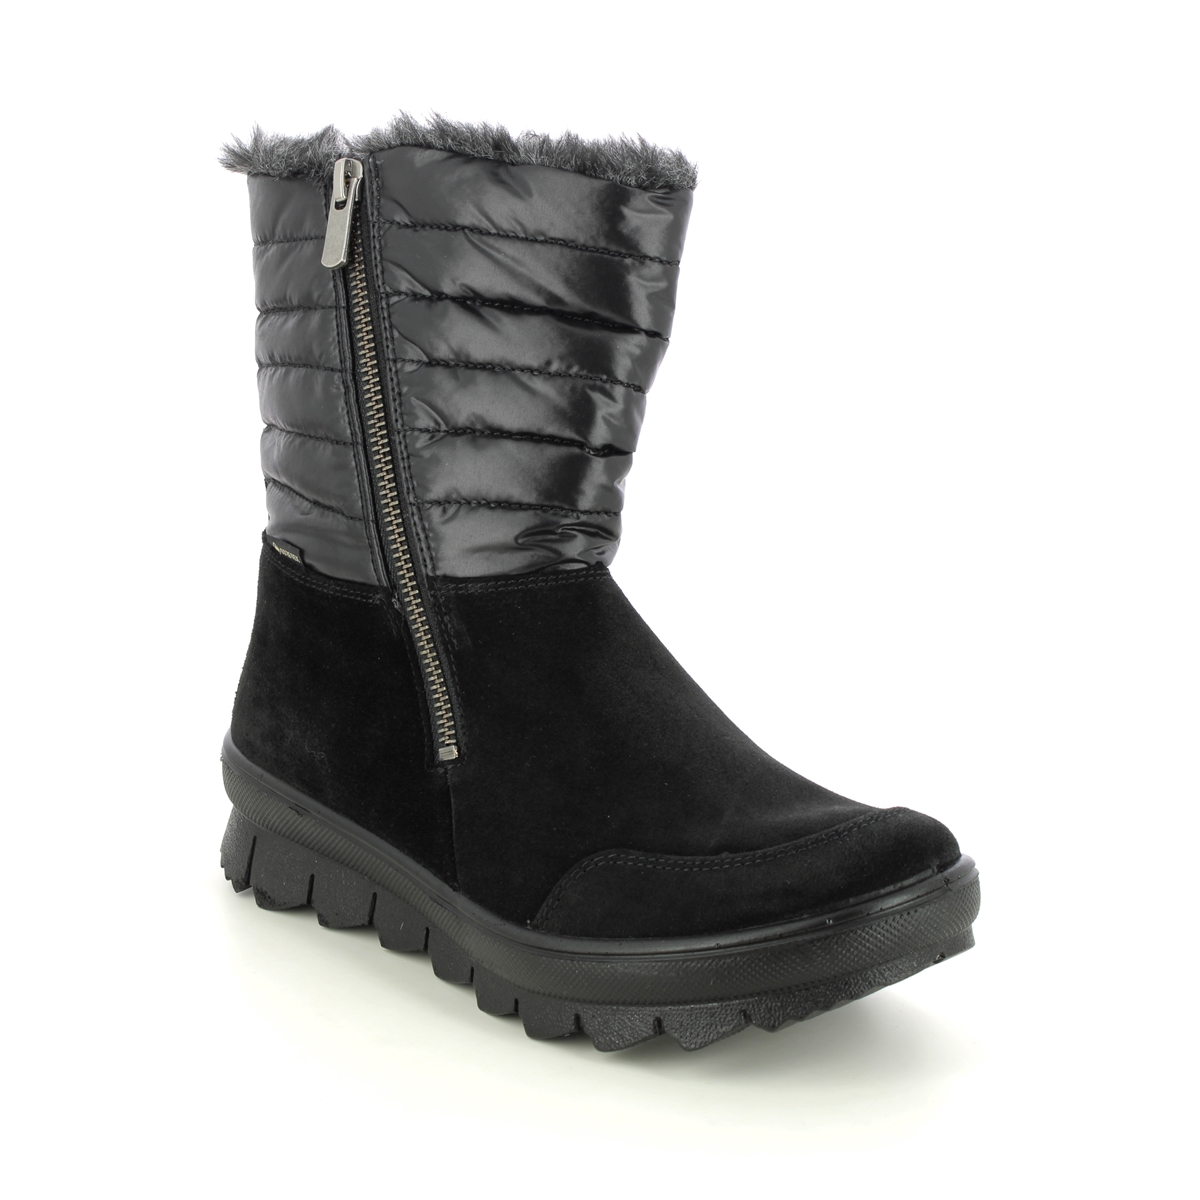 Legero Novara Zip Gtx Black Suede Womens Mid Calf Boots 2009900-0000 in a Plain Leather in Size 6